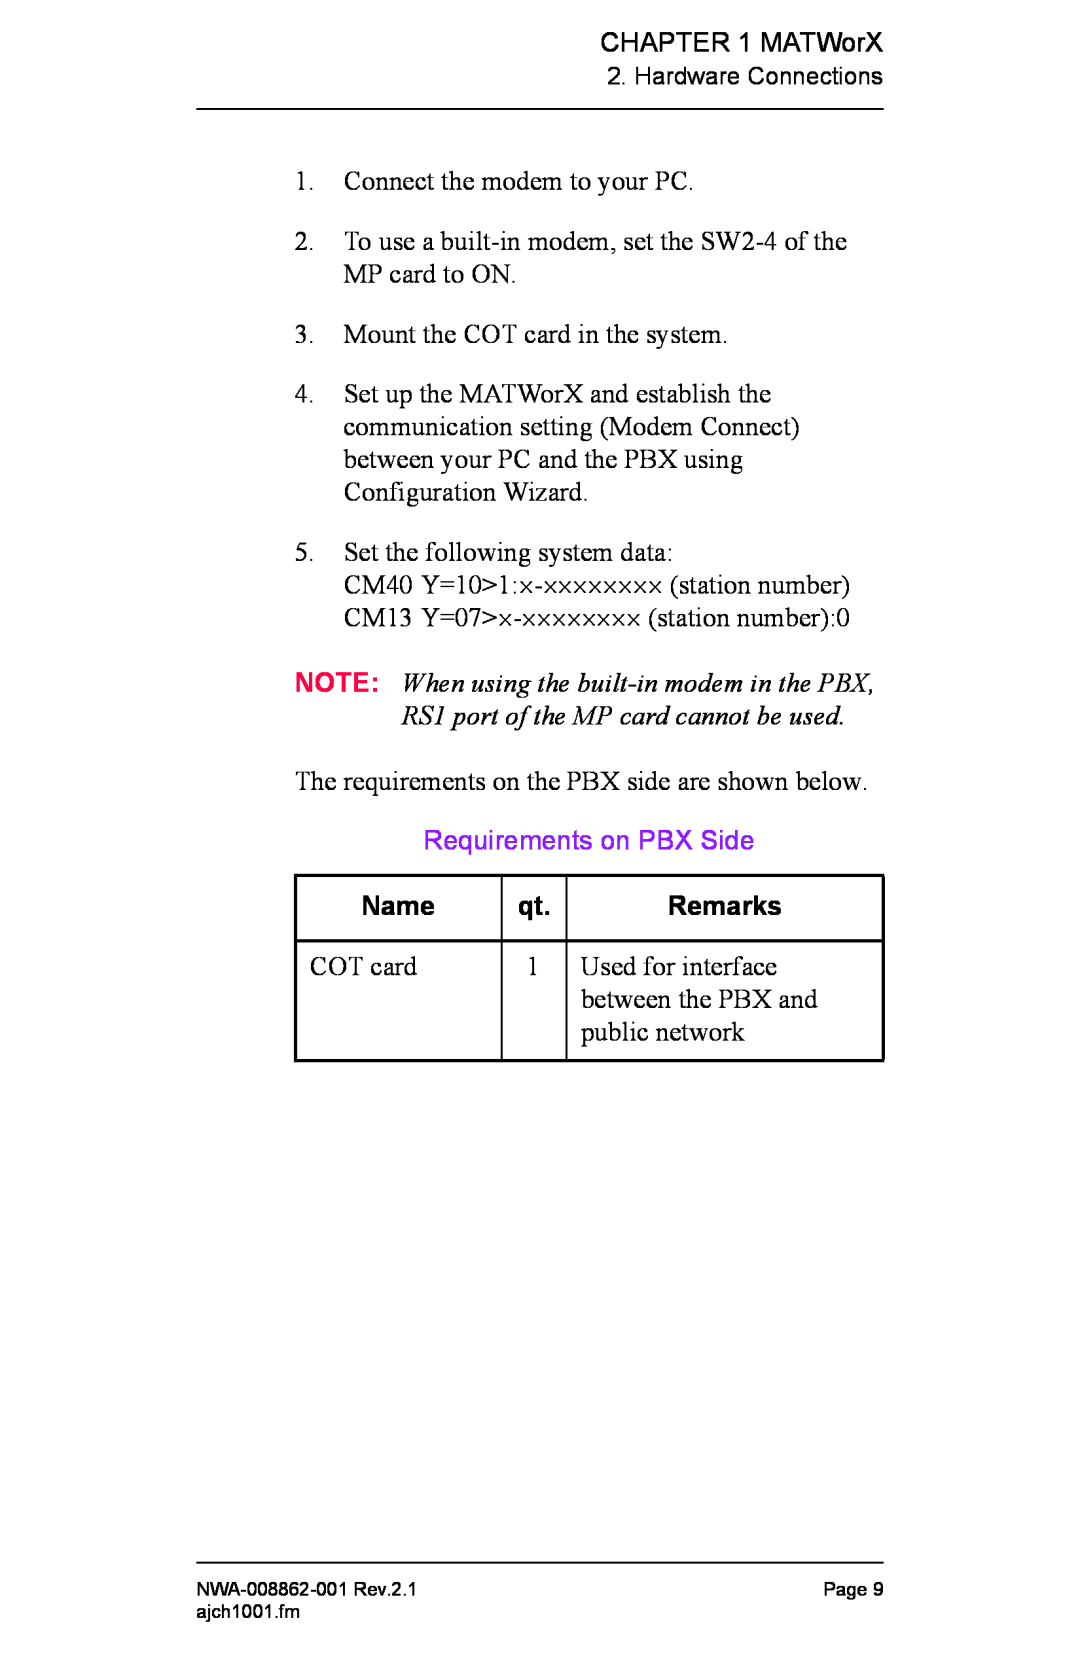 NEC NWA-008862-001 manual Requirements on PBX Side, Connect the modem to your PC, Name, Remarks 